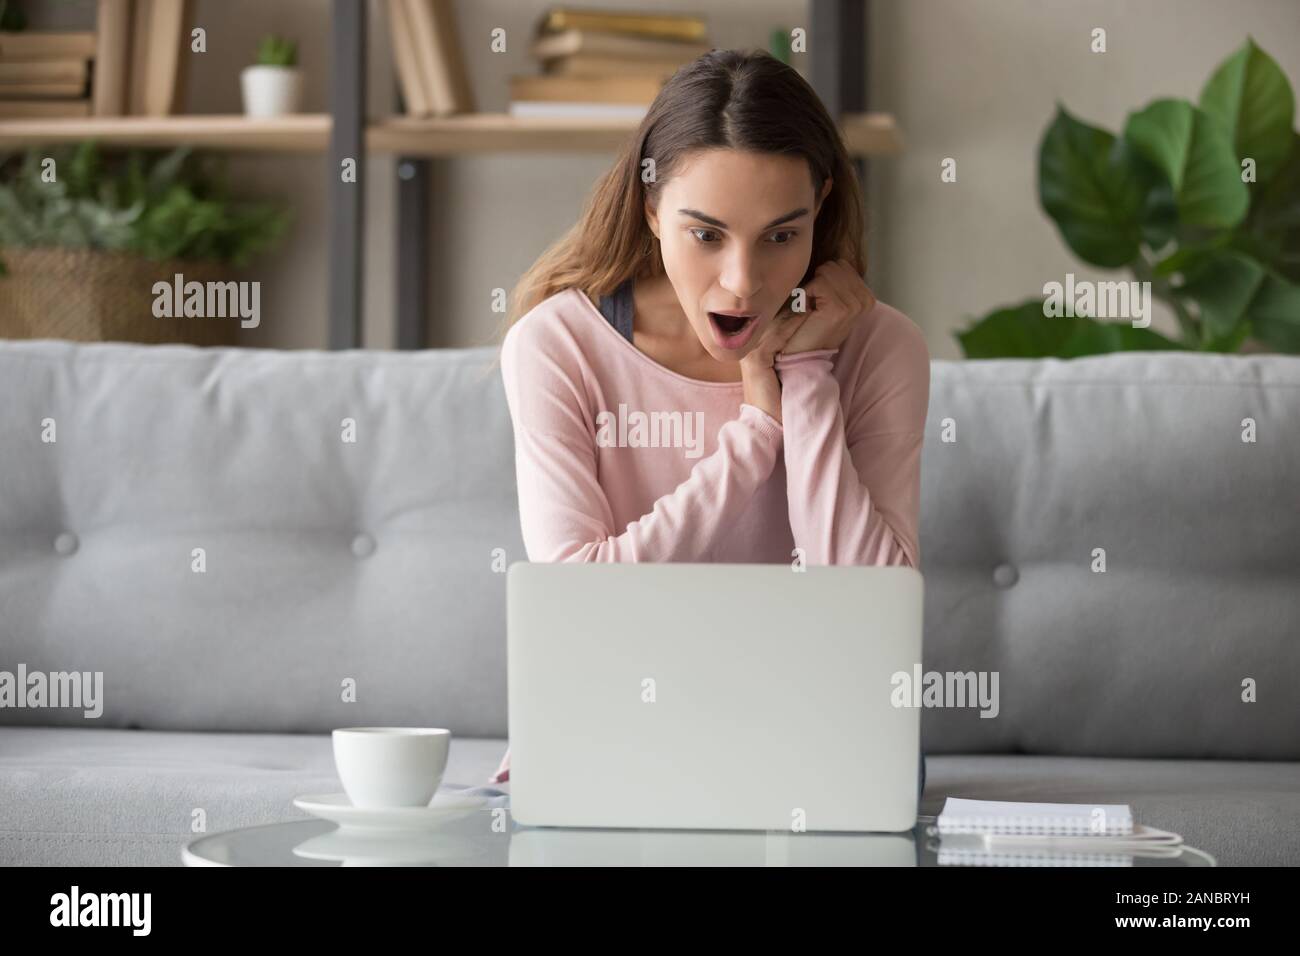 Astonished young lady stared at computer screen. Stock Photo